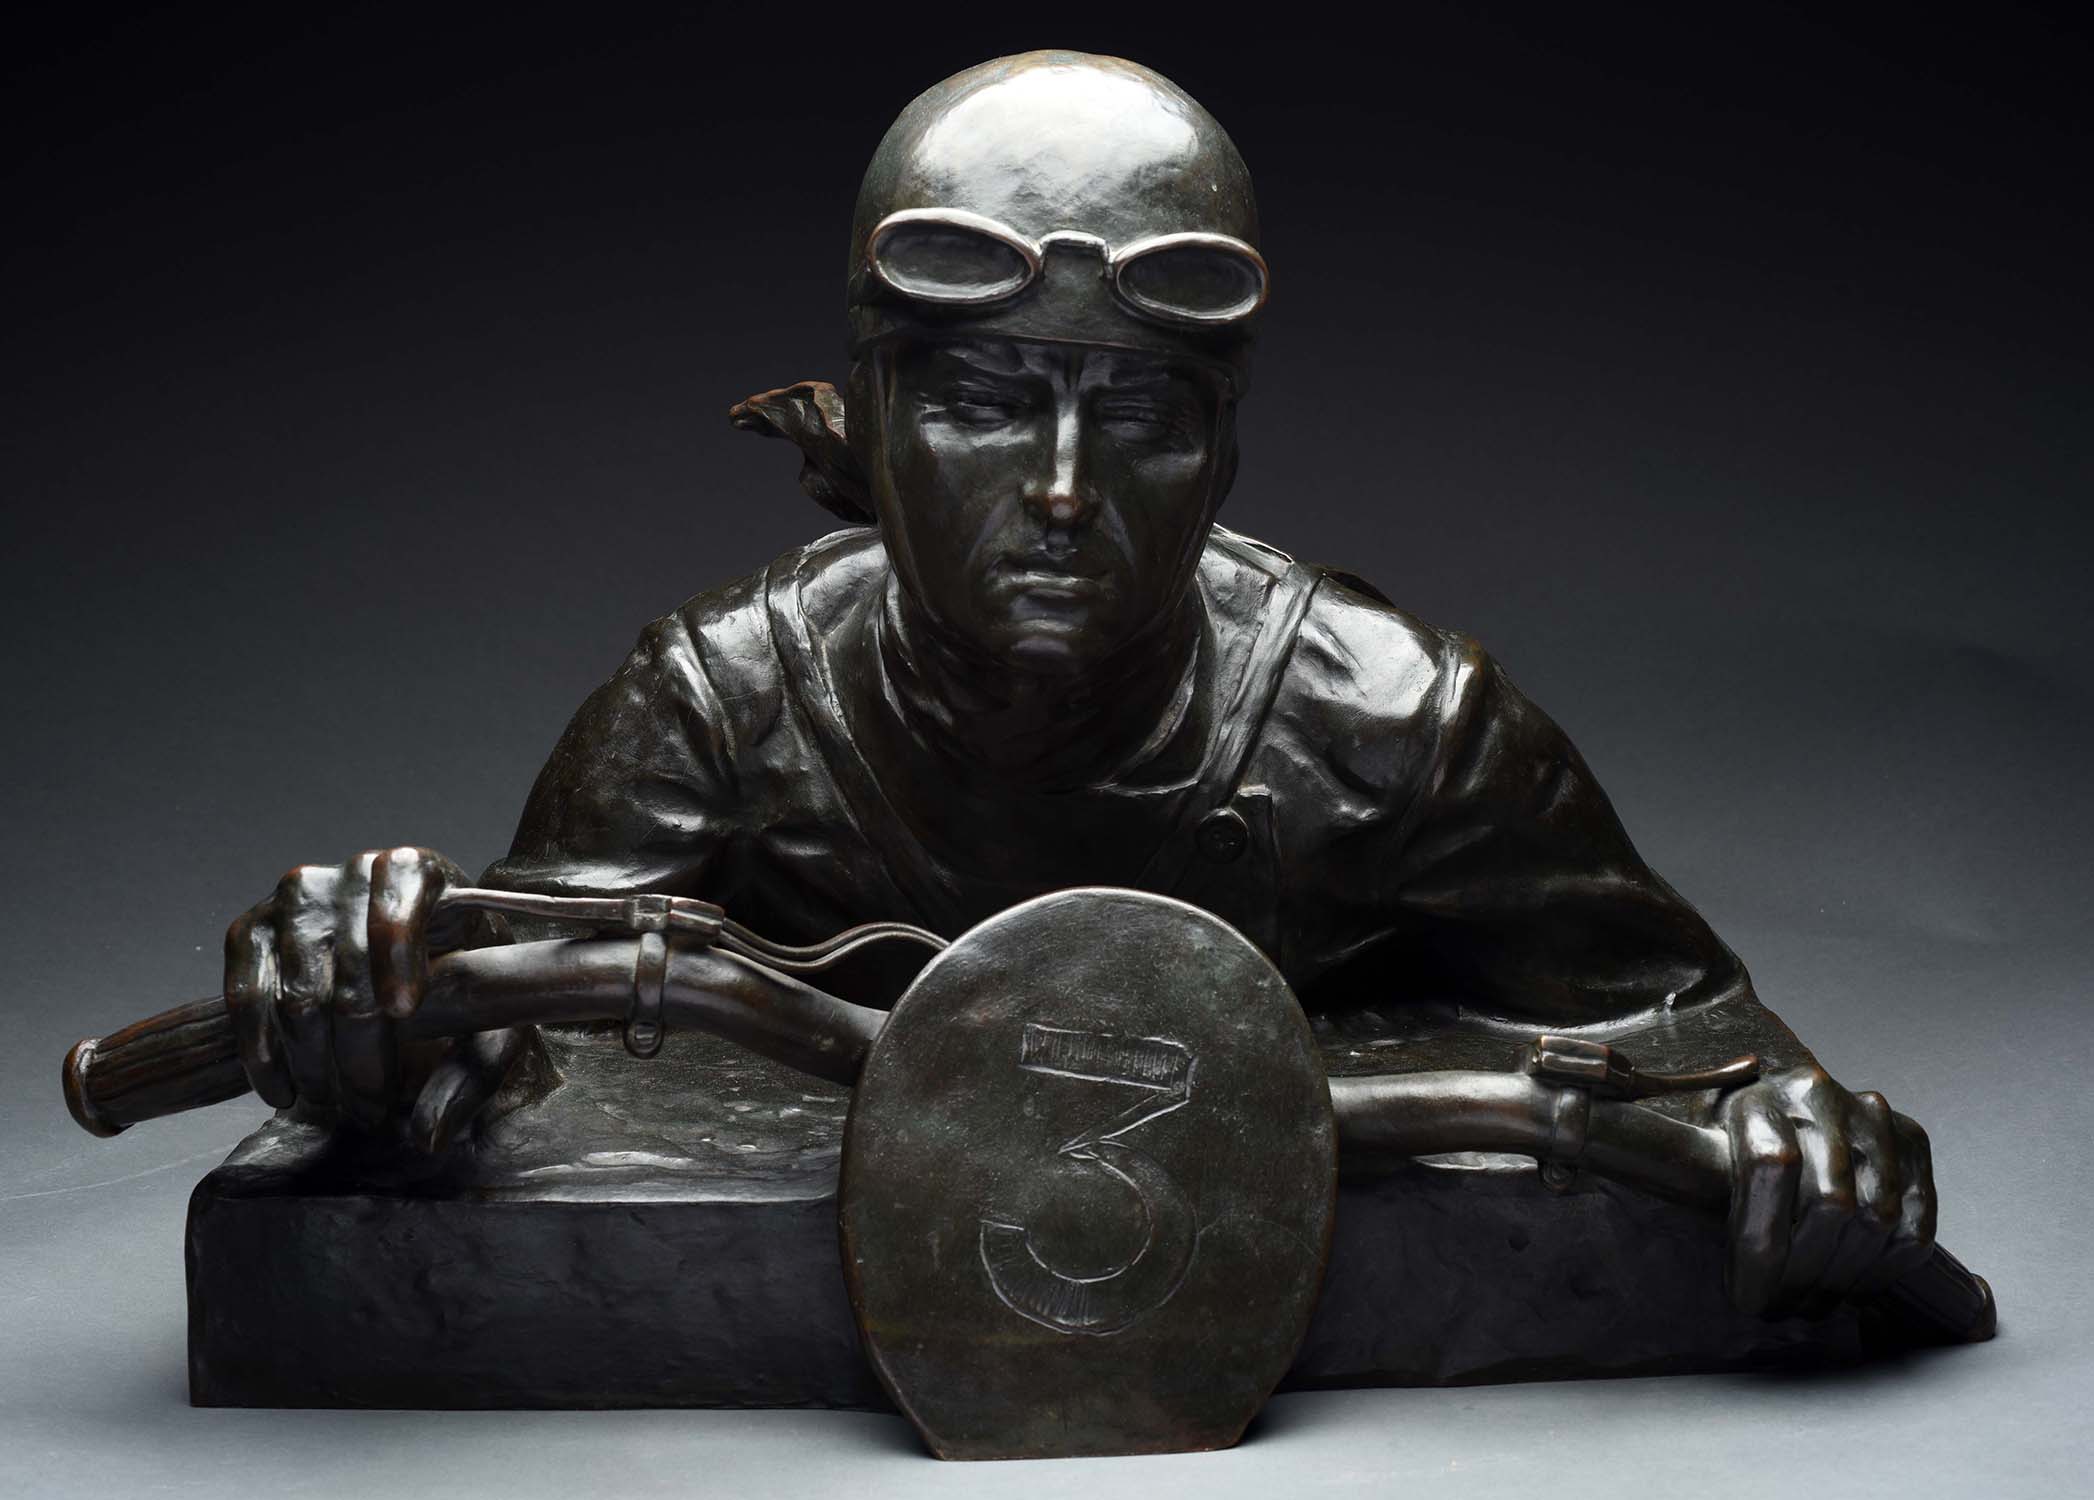 Bronze Bust of Motorcycle Racer, estimated at $4,000-6,000.